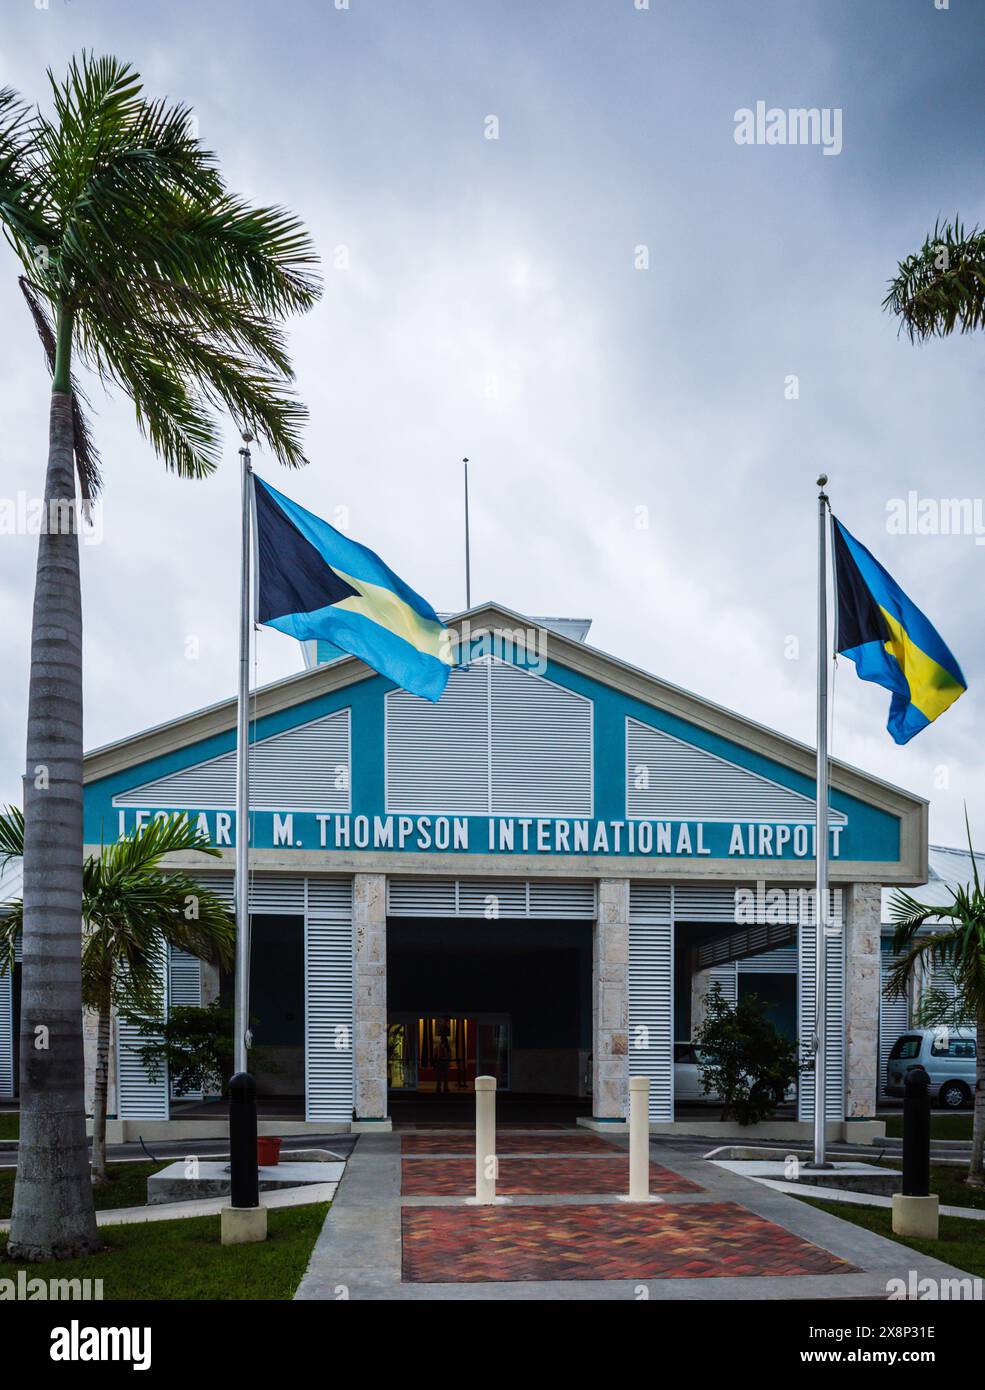 Front exterior of Leonard M. Thompson International Airport in Hope Town, Abaco, The Bahamas. Stock Photo